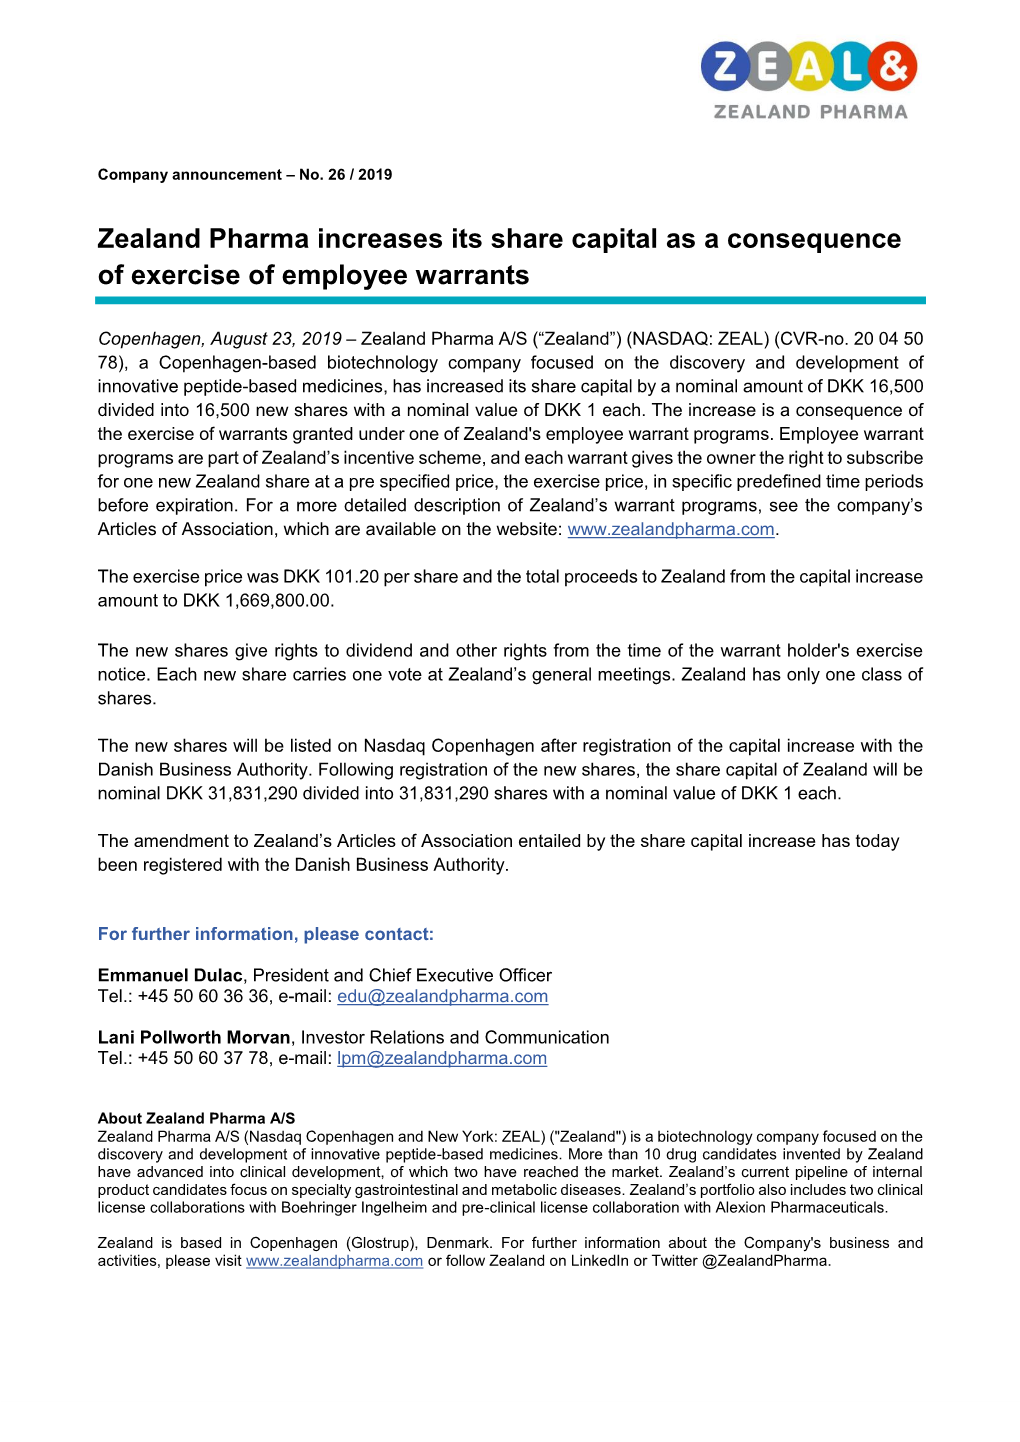 Zealand Pharma Increases Its Share Capital As a Consequence of Exercise of Employee Warrants